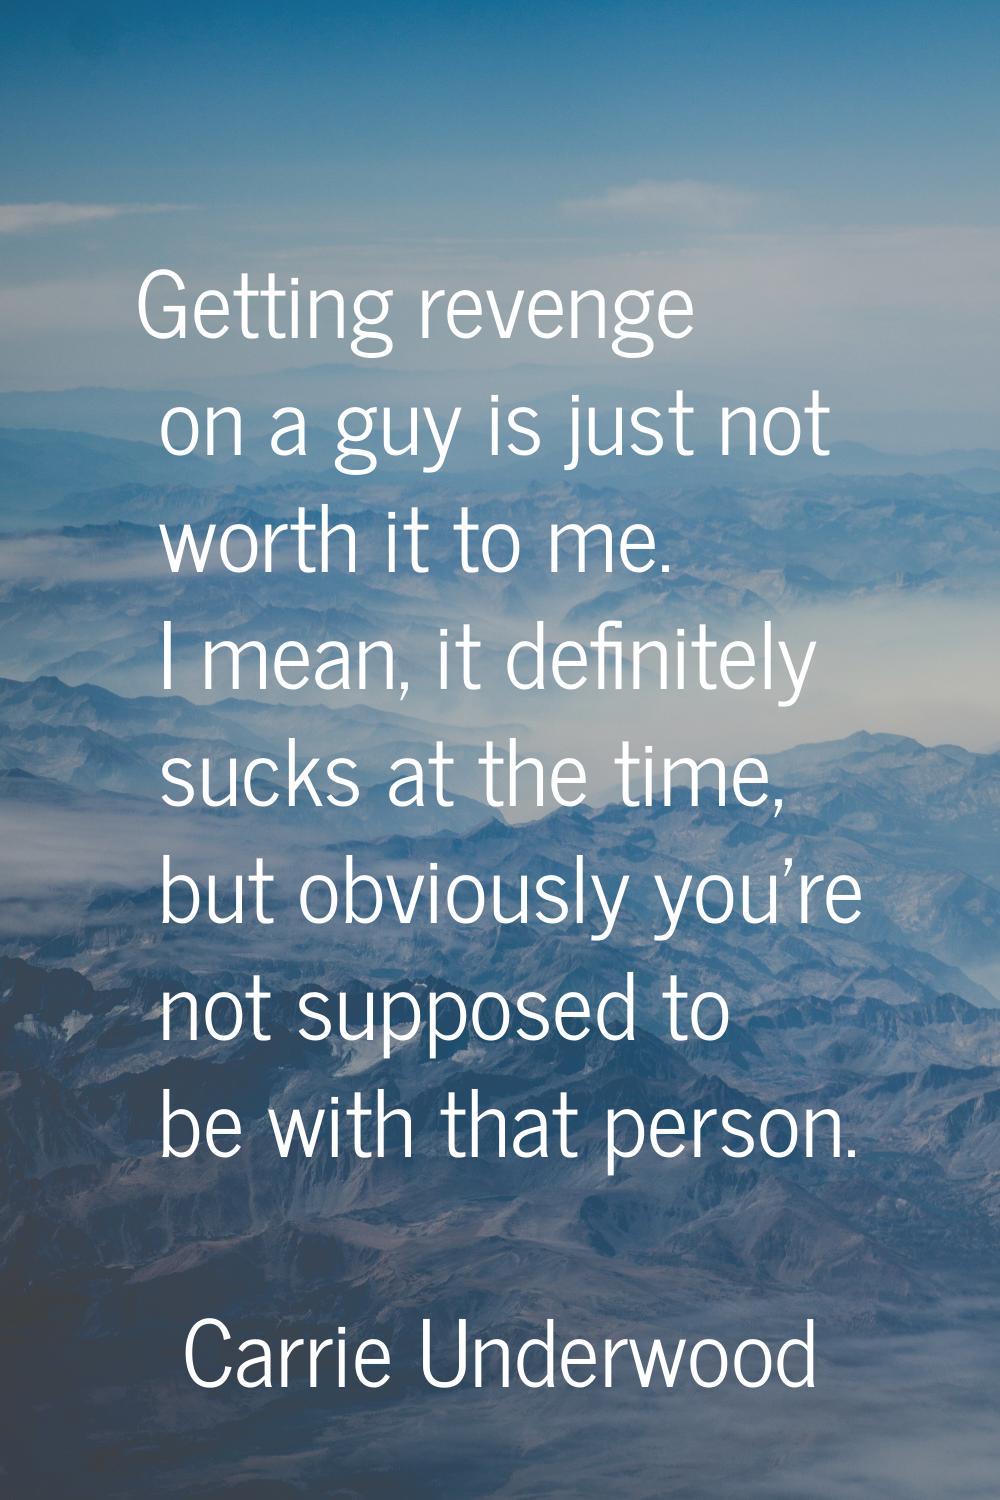 Getting revenge on a guy is just not worth it to me. I mean, it definitely sucks at the time, but o